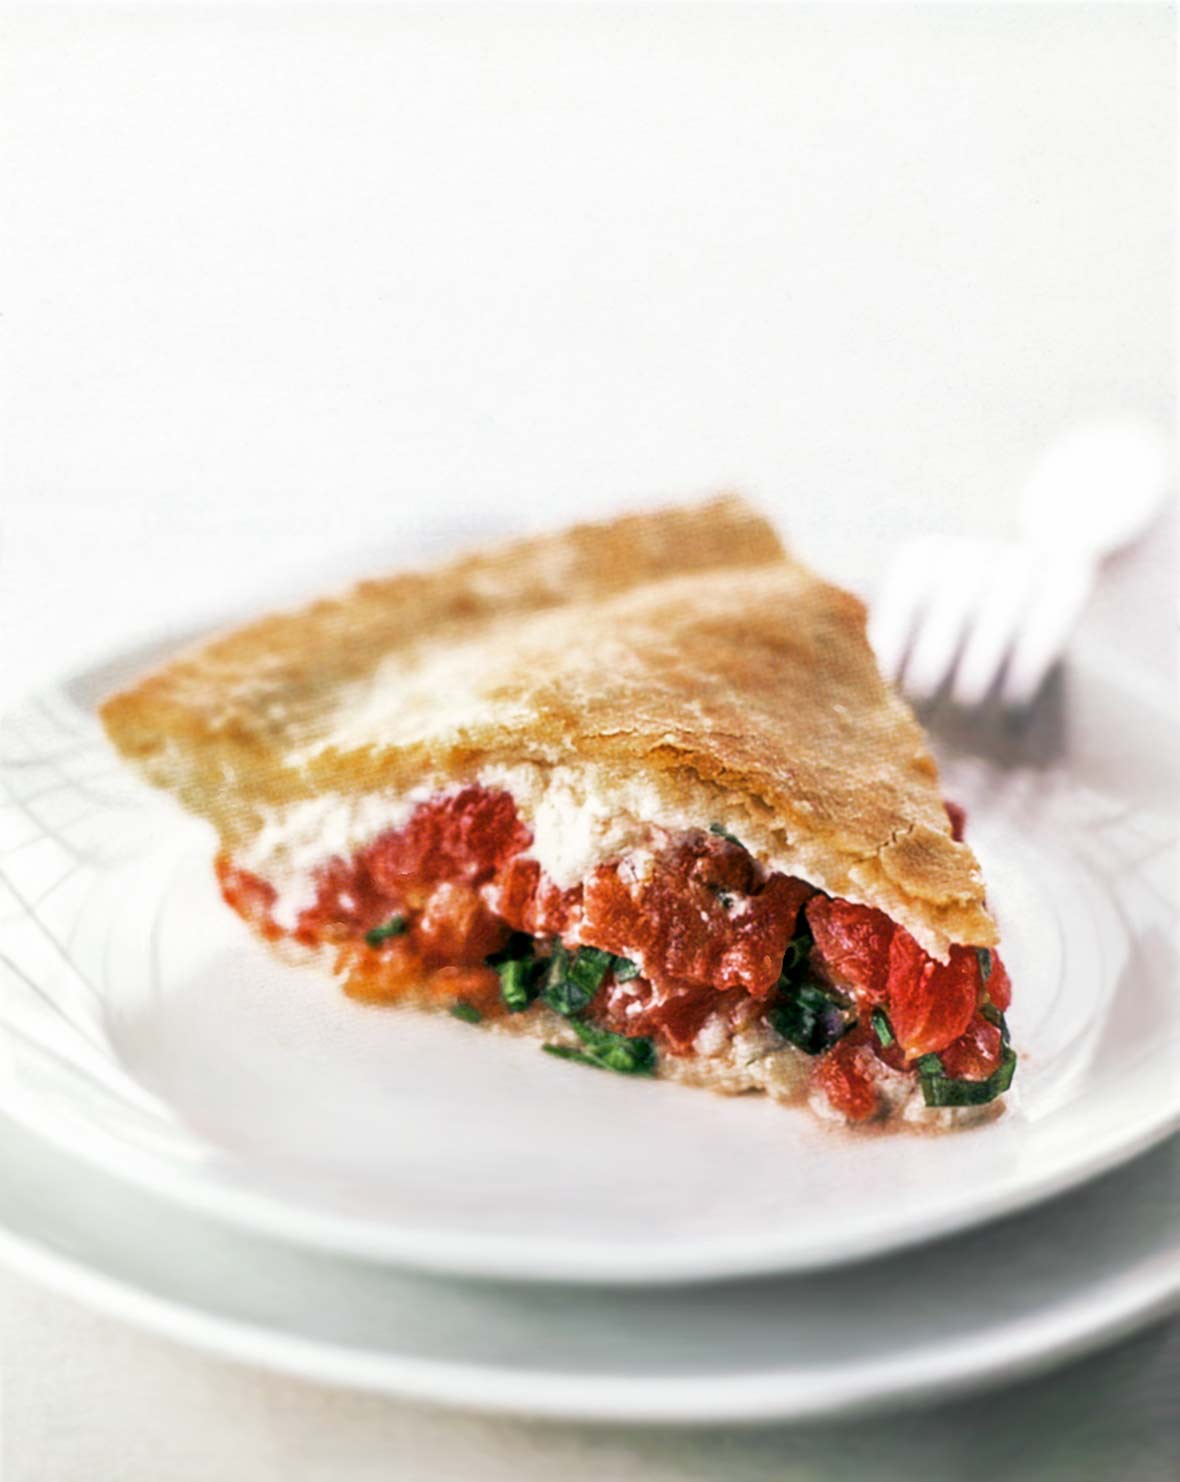 A wedge of tomato pie on a white plate with a fork in the background.